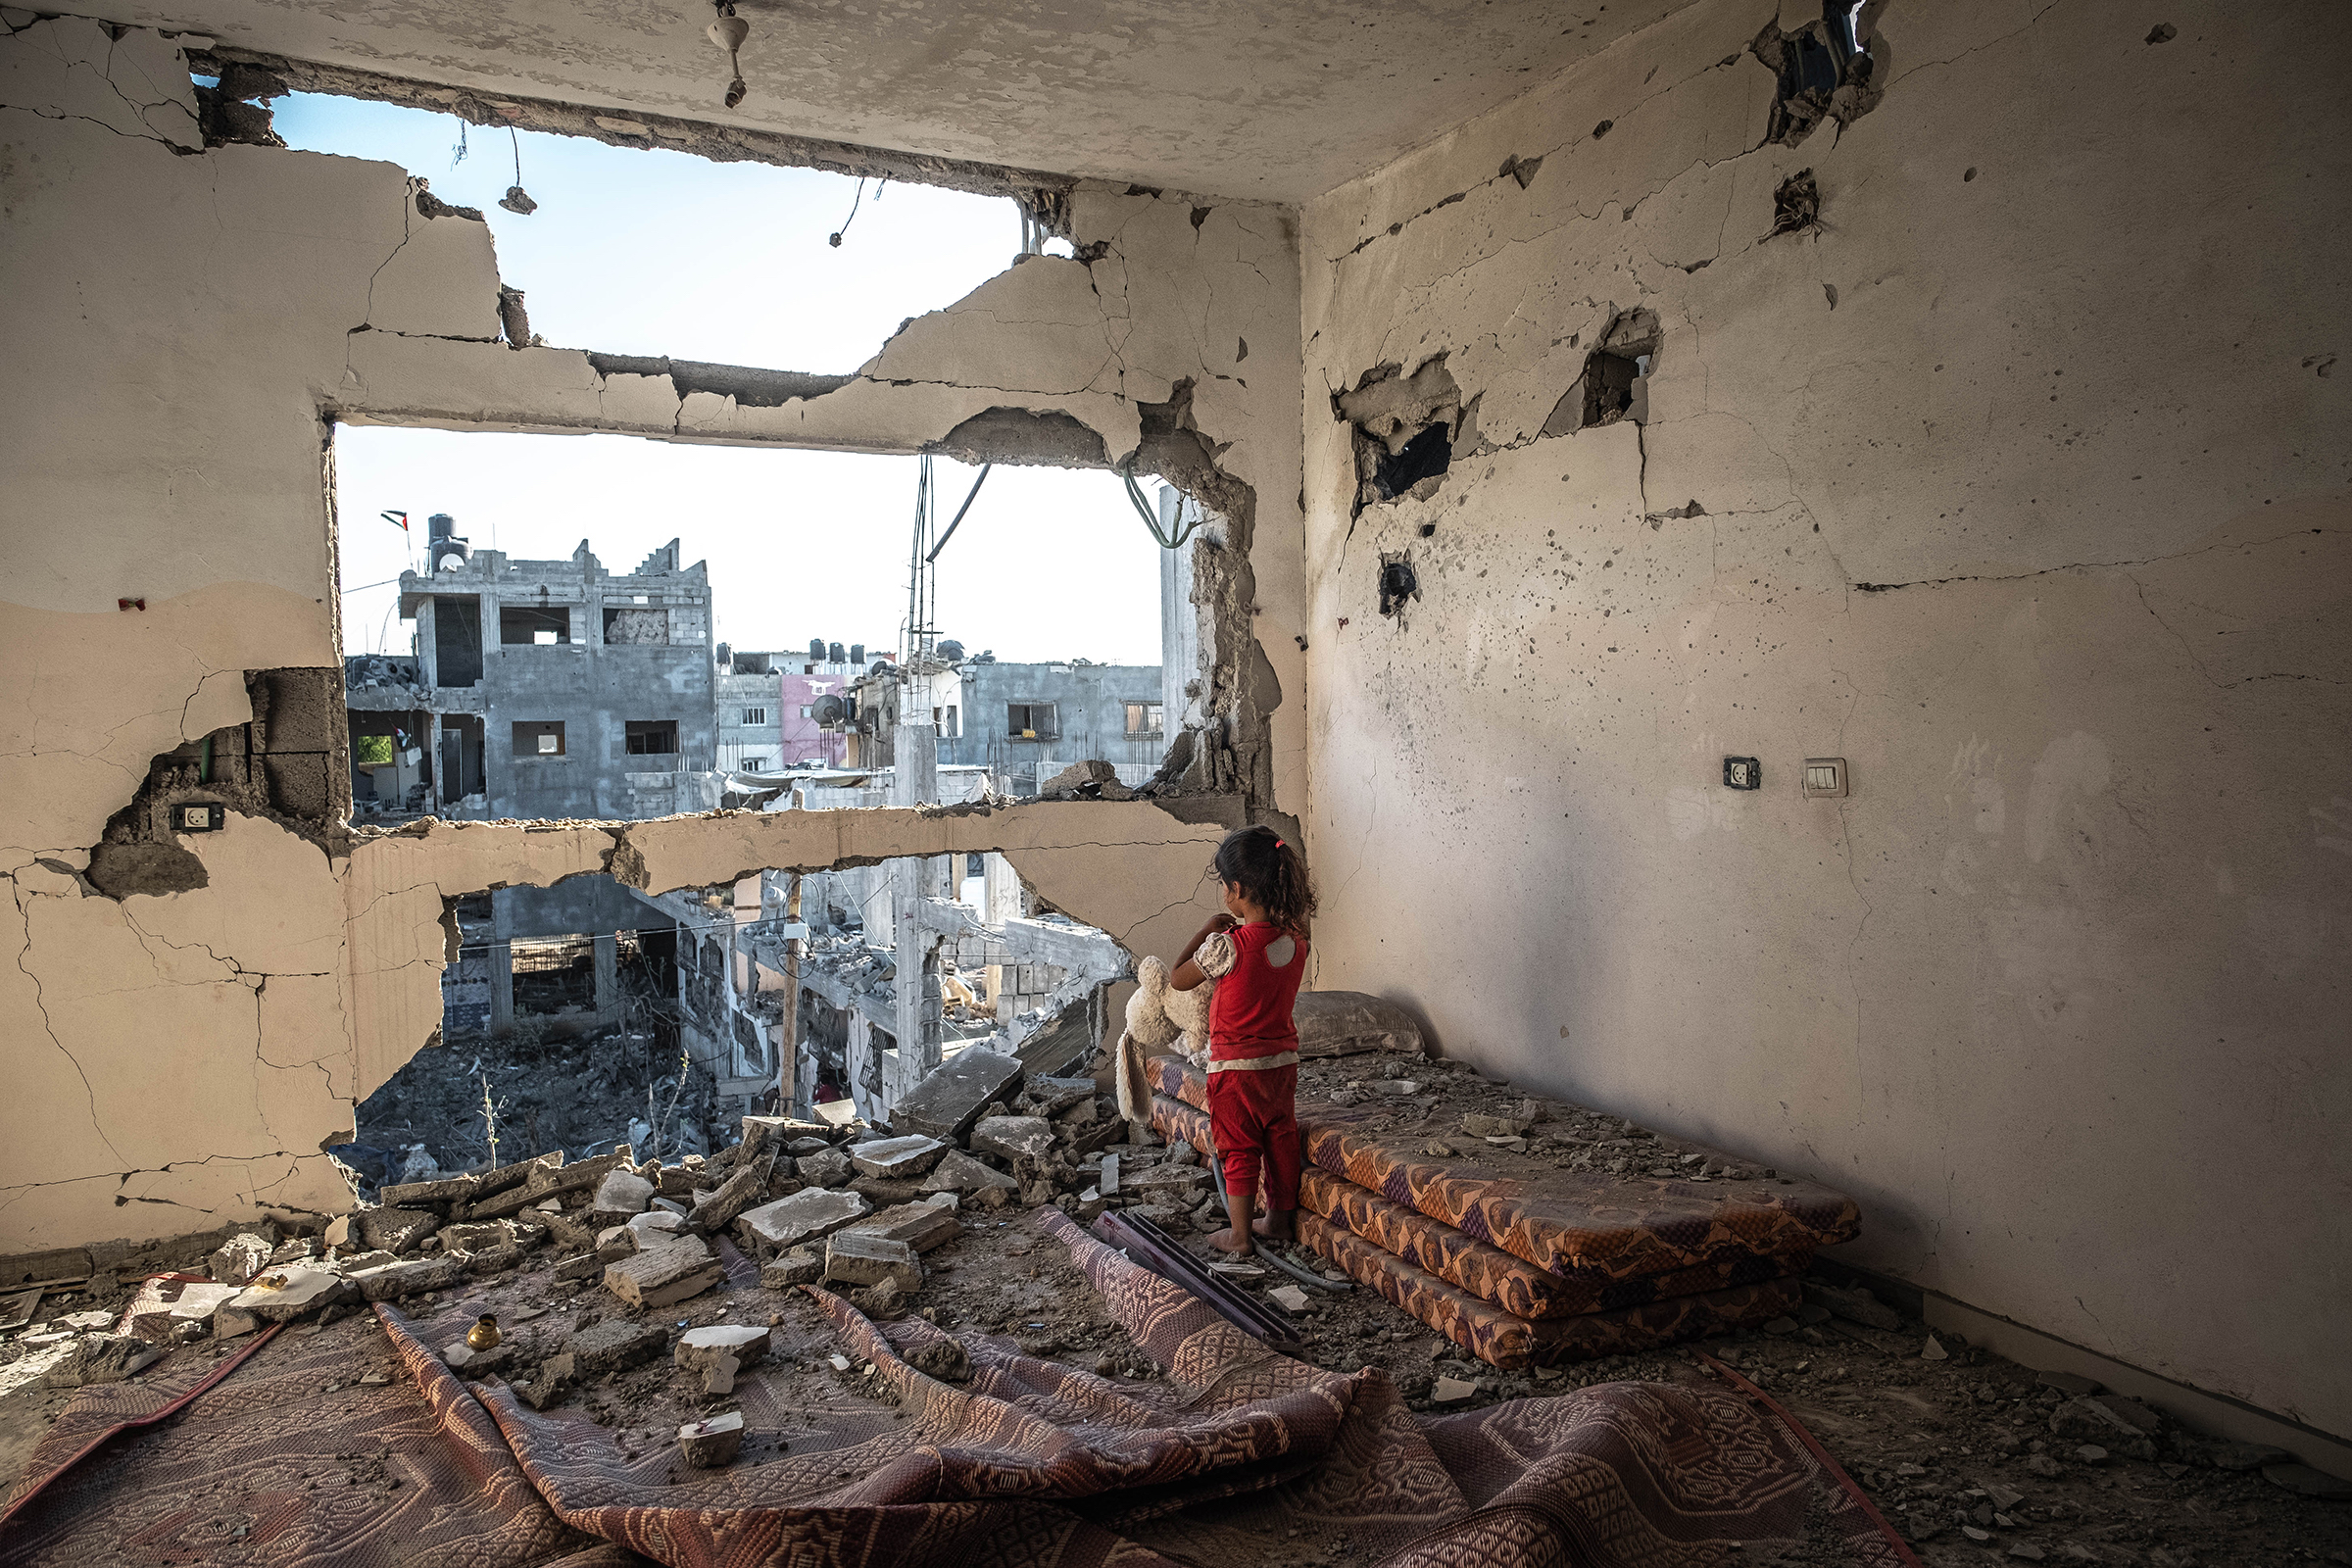 With a cease-fire in effect, a Palestinian girl stands in her destroyed home in Beit Hanoun, Gaza, on May 24. Twelve in Israel and more than 250 Palestinians were killed in the deadliest escalation in the conflict since 2014, as unguided rocket fire from Hamas, which governs the 2 million people in Gaza, was answered by Israeli air and artillery strikes. The battle erupted after Israeli authorities moved against Palestinians at sensitive sites inside Israel, including Jerusalem’s al-Aqsa Mosque. (Fatima Shbair—Getty Images)